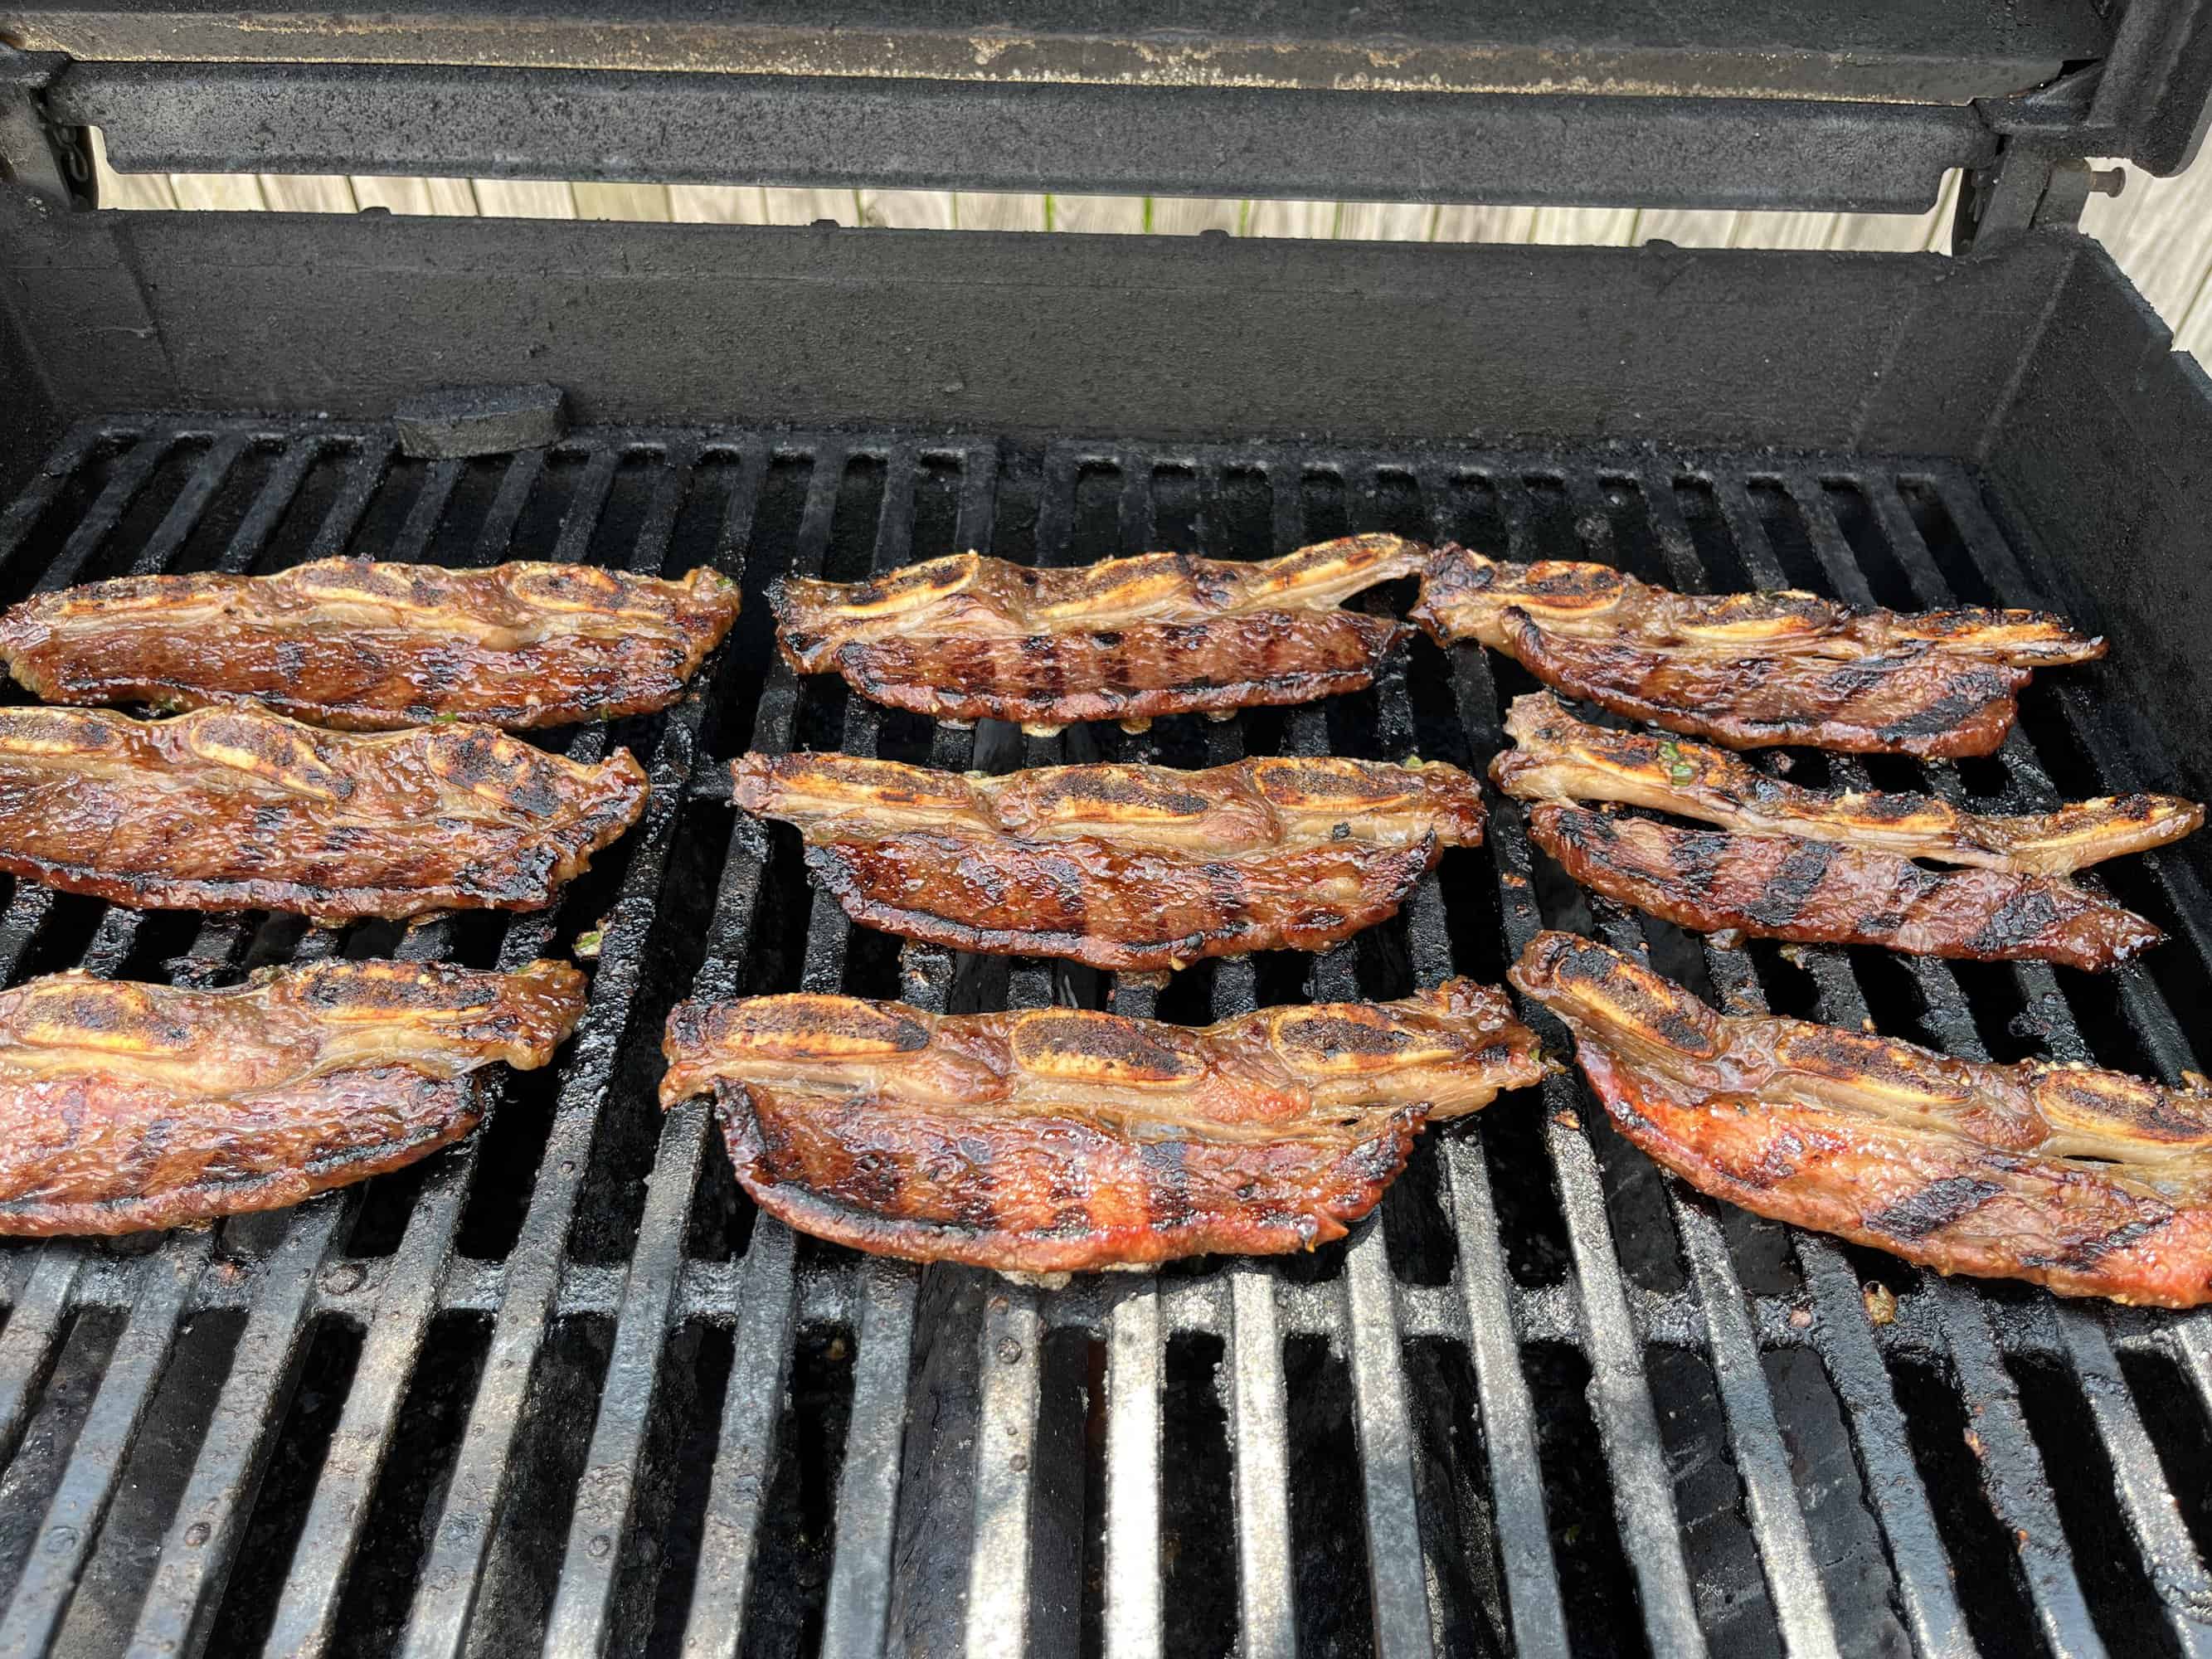 Kalbi being cooked on the grill